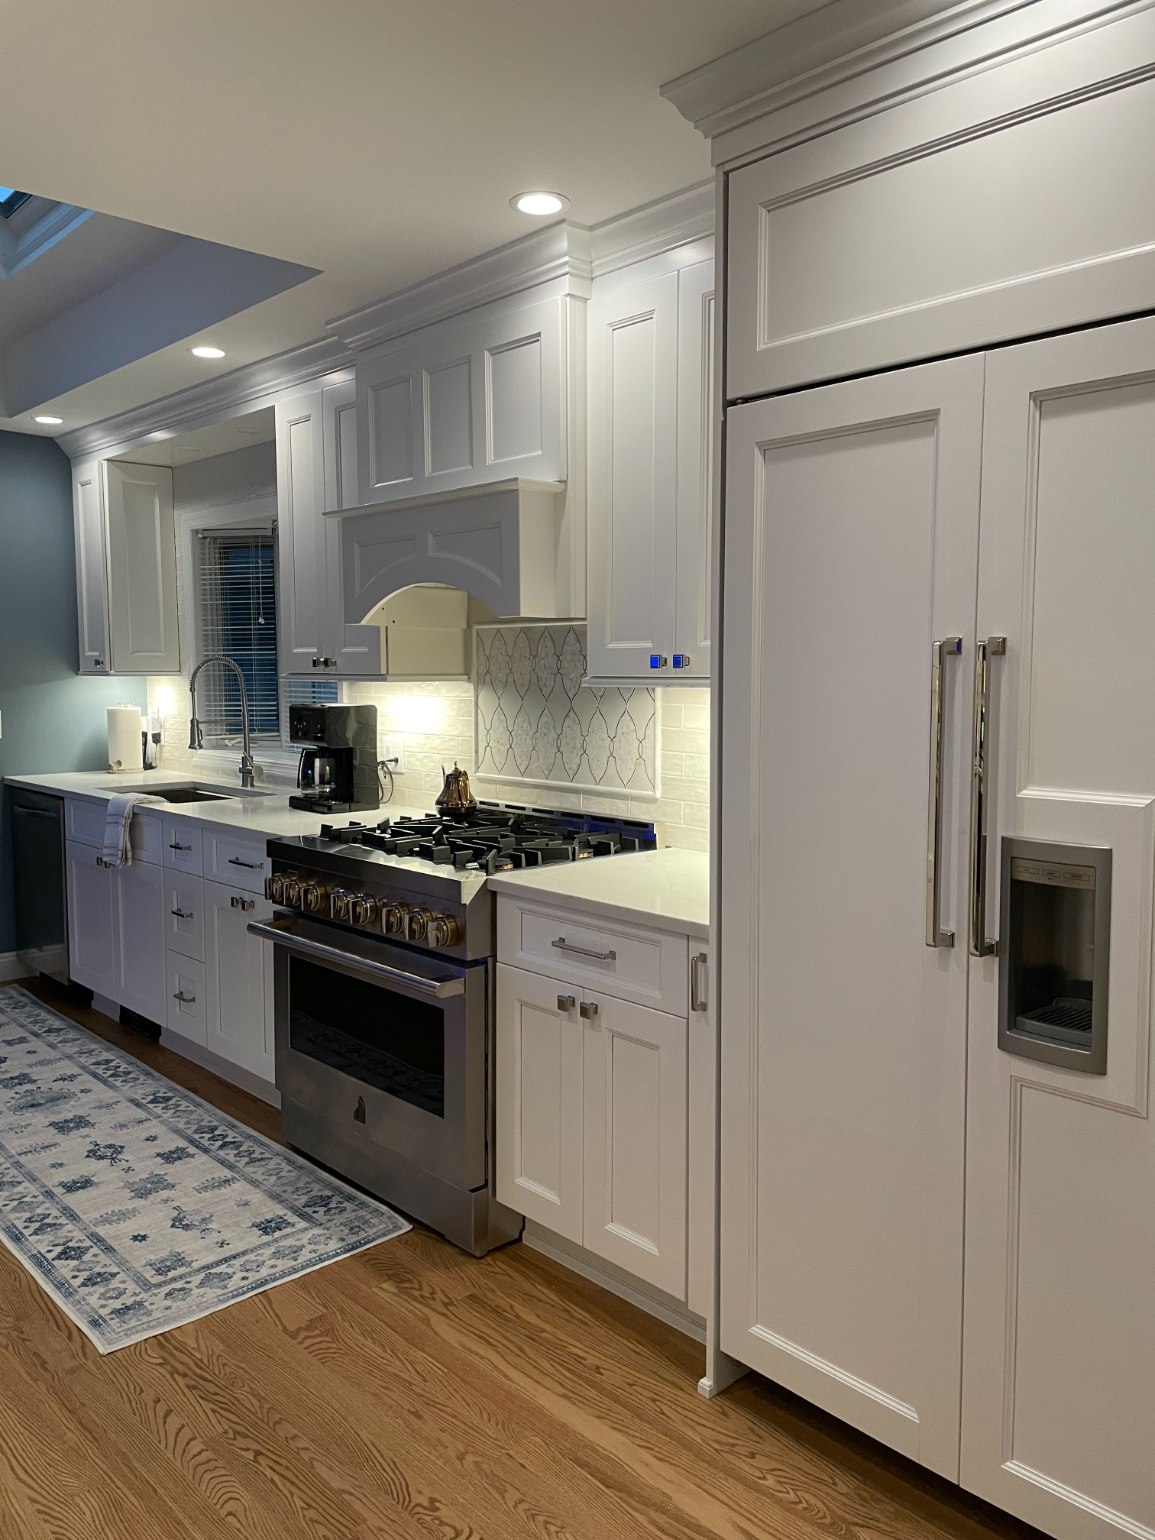 White kitchen cabinets in Islip, New York kitchen remodel by Kuhn Construction